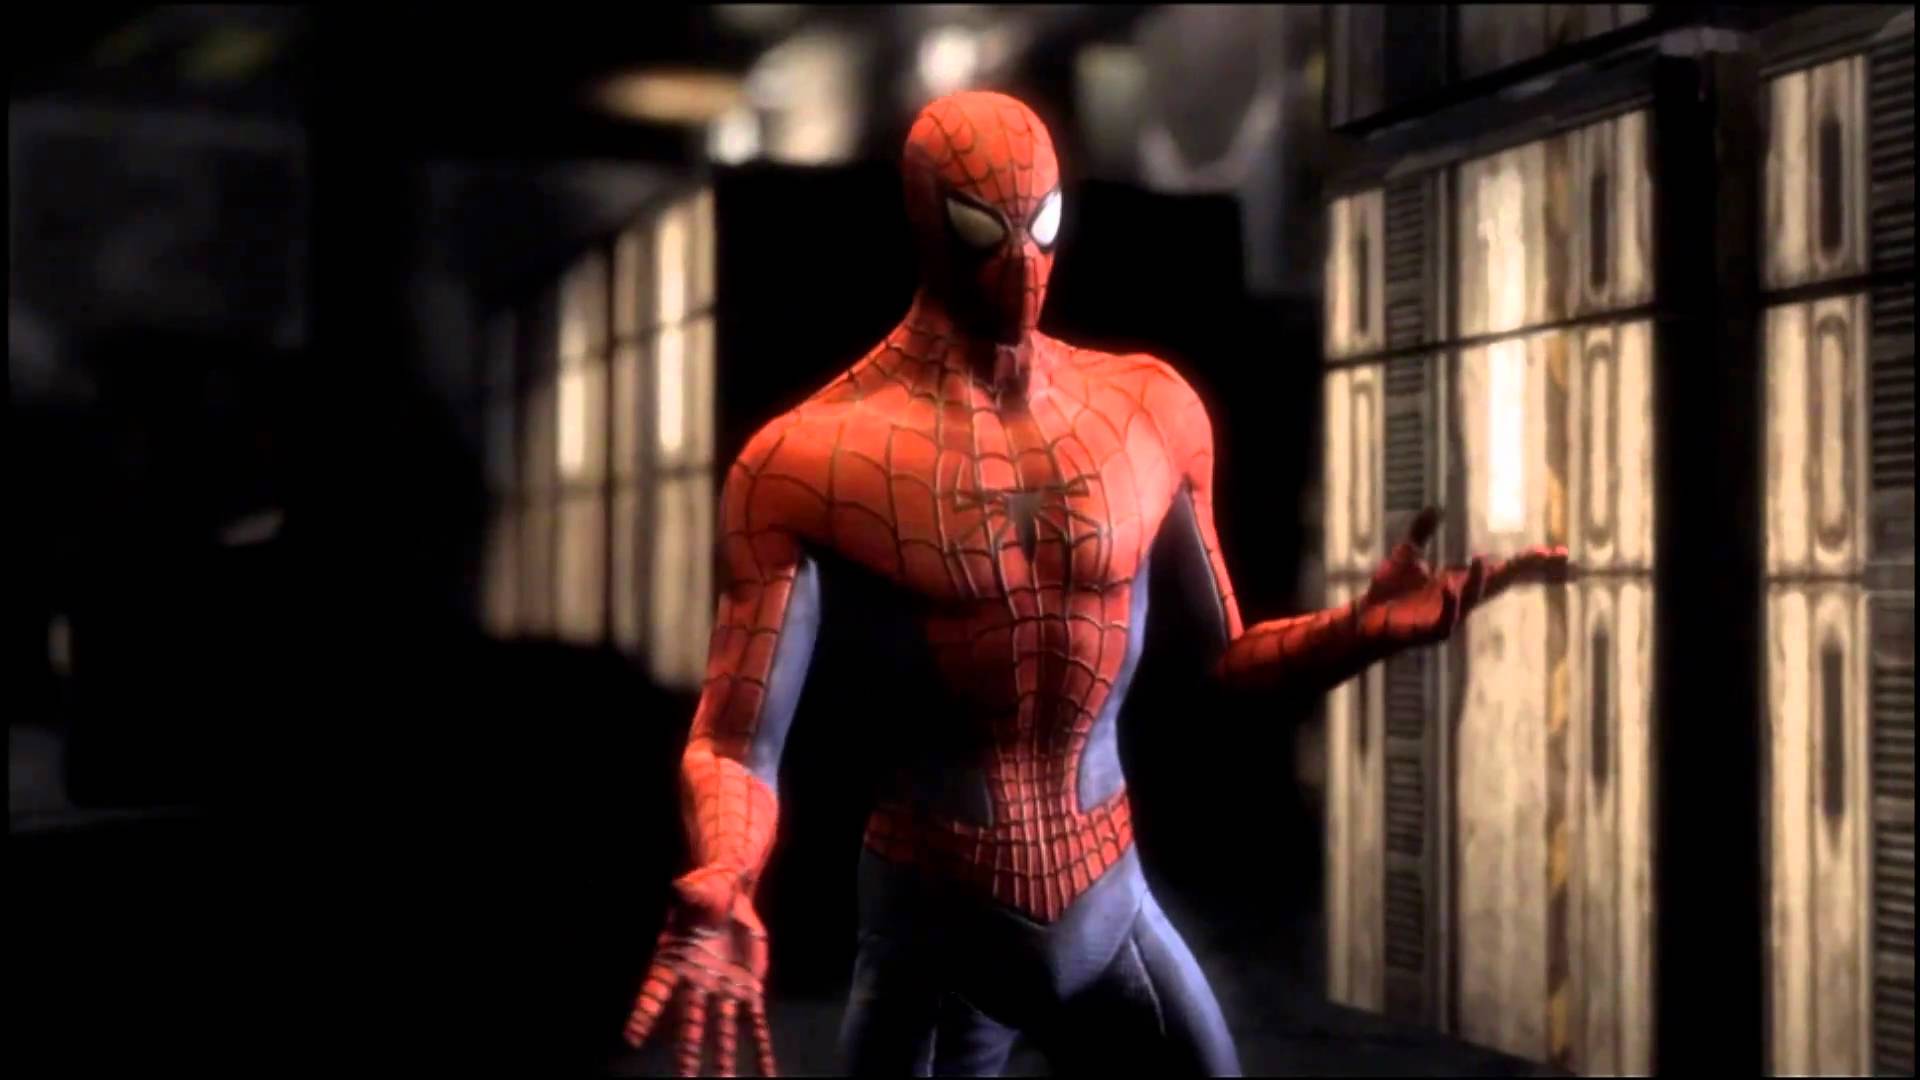 MARVEL: ULTIMATE ALLIANCE Worst PC Port Ever According To Users